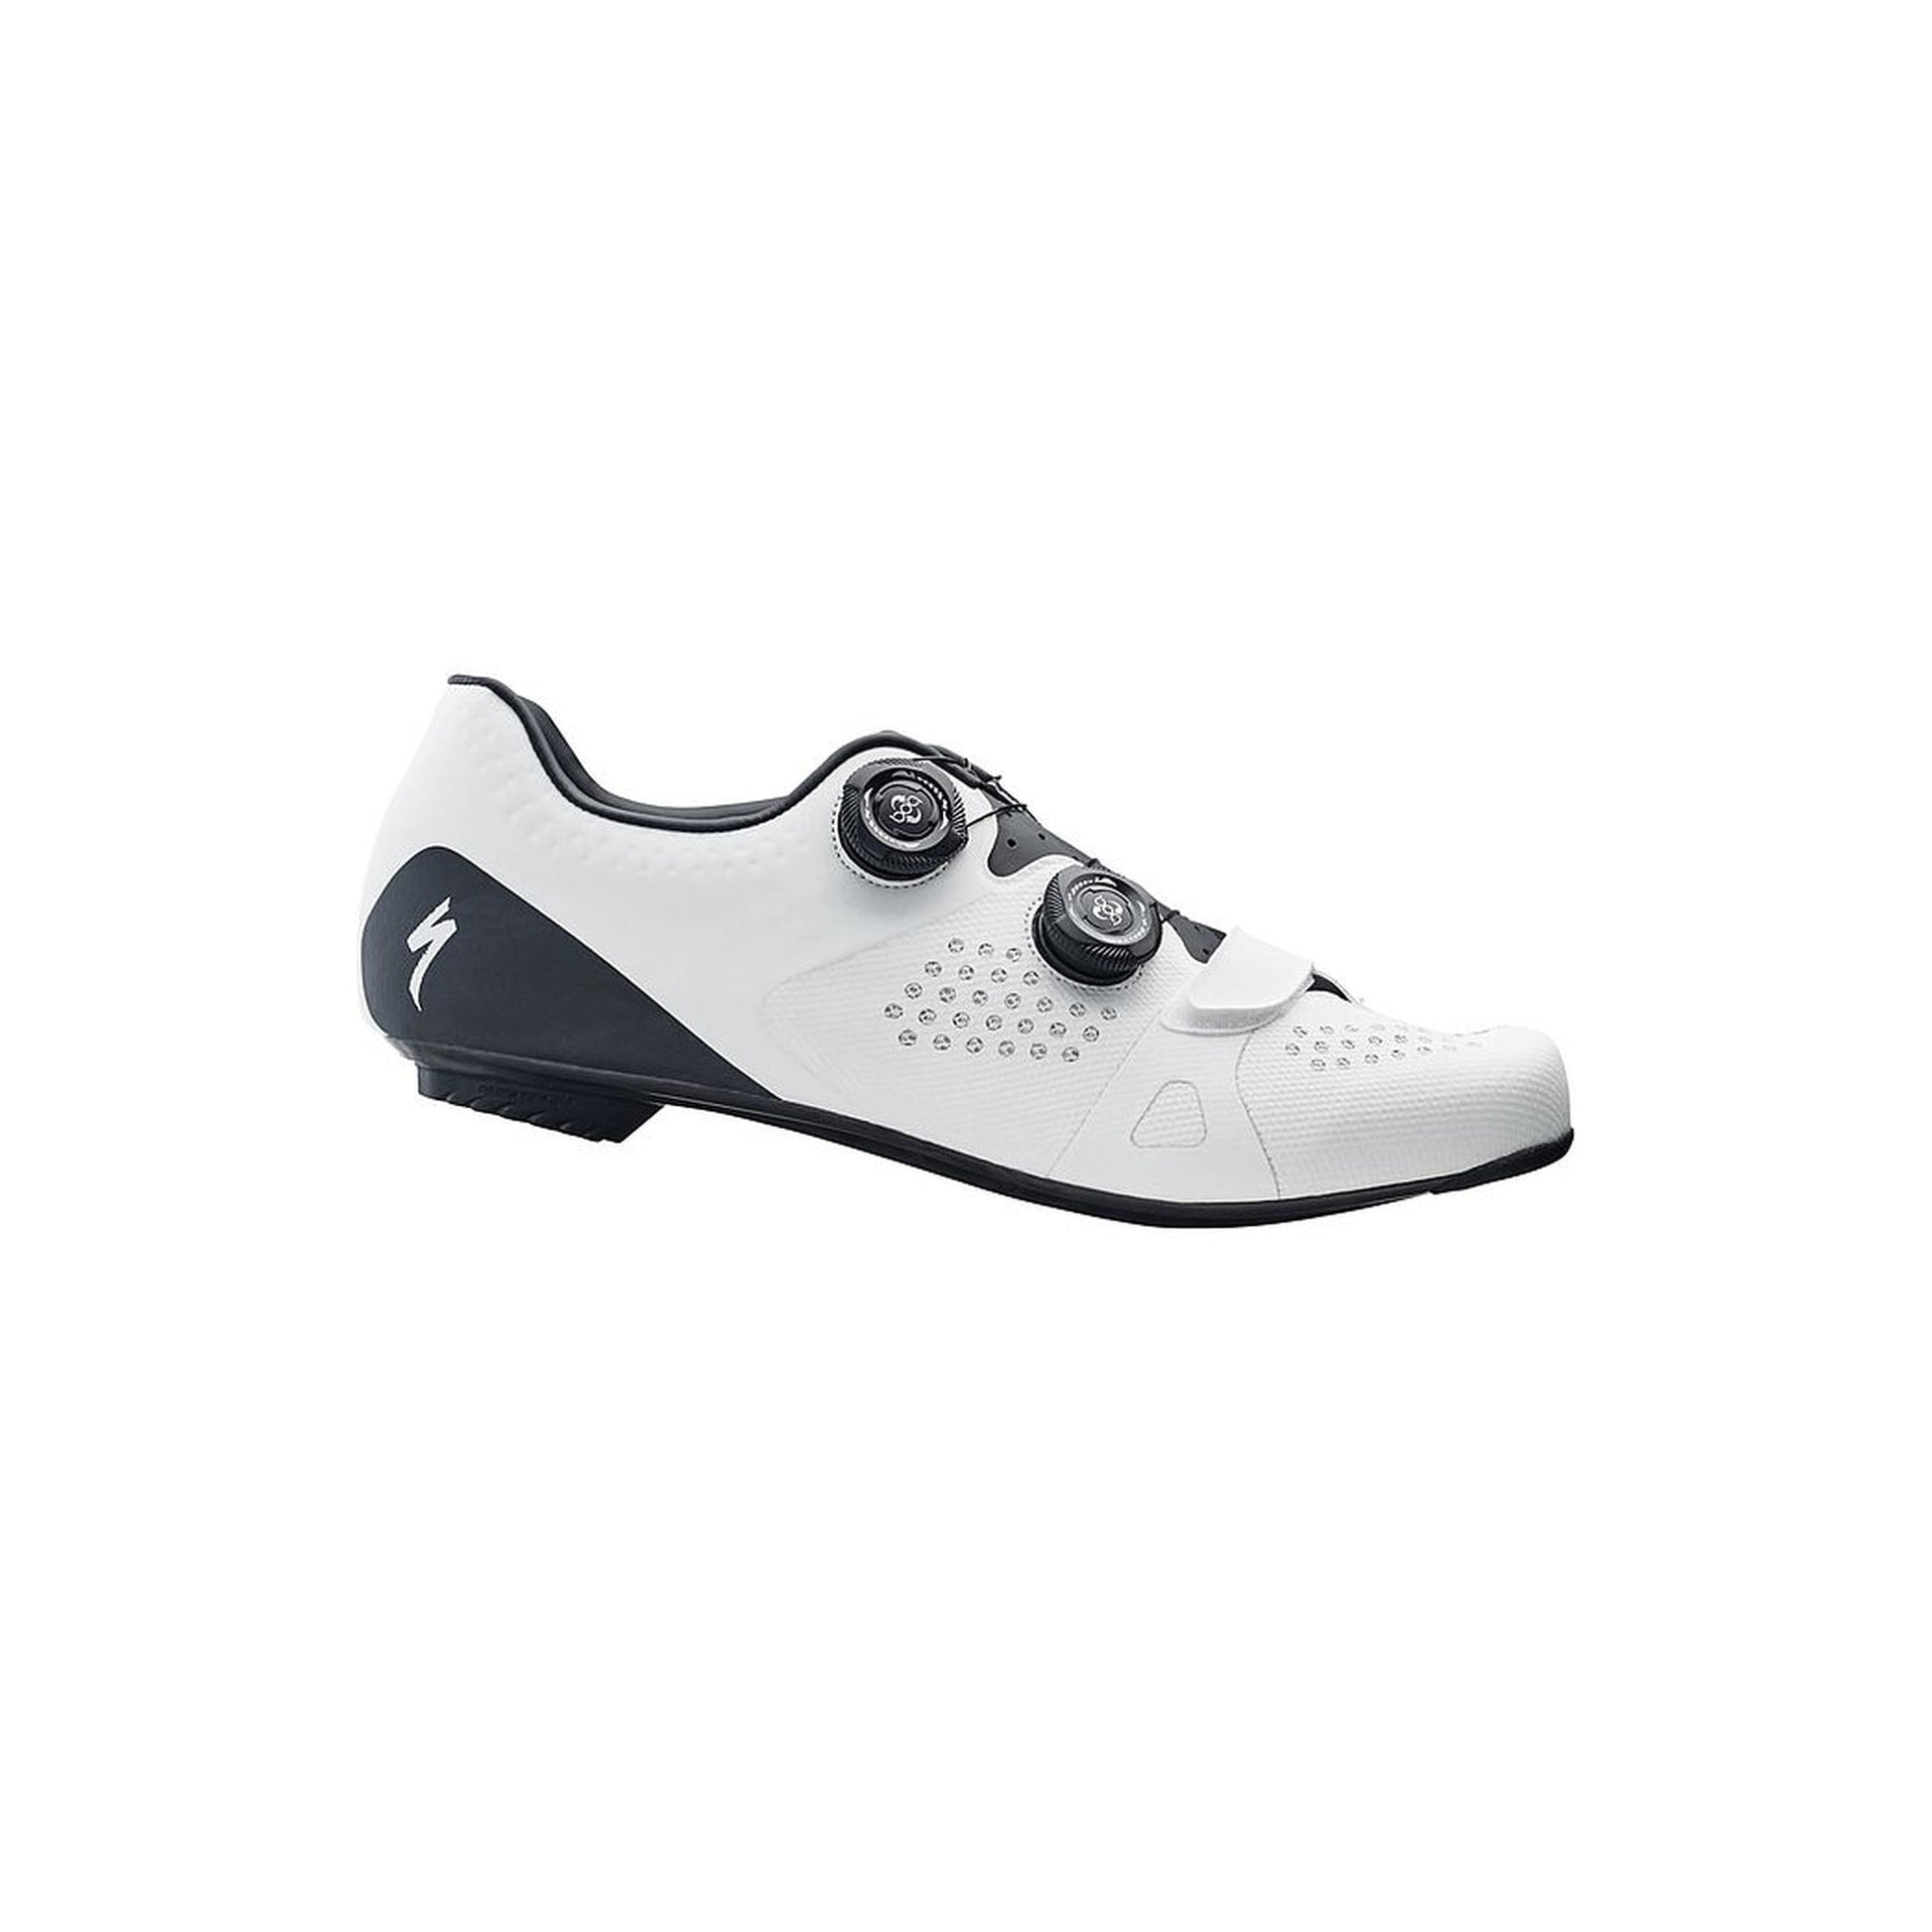 Torch 3.0 Road Shoes-Cycles Direct Specialized